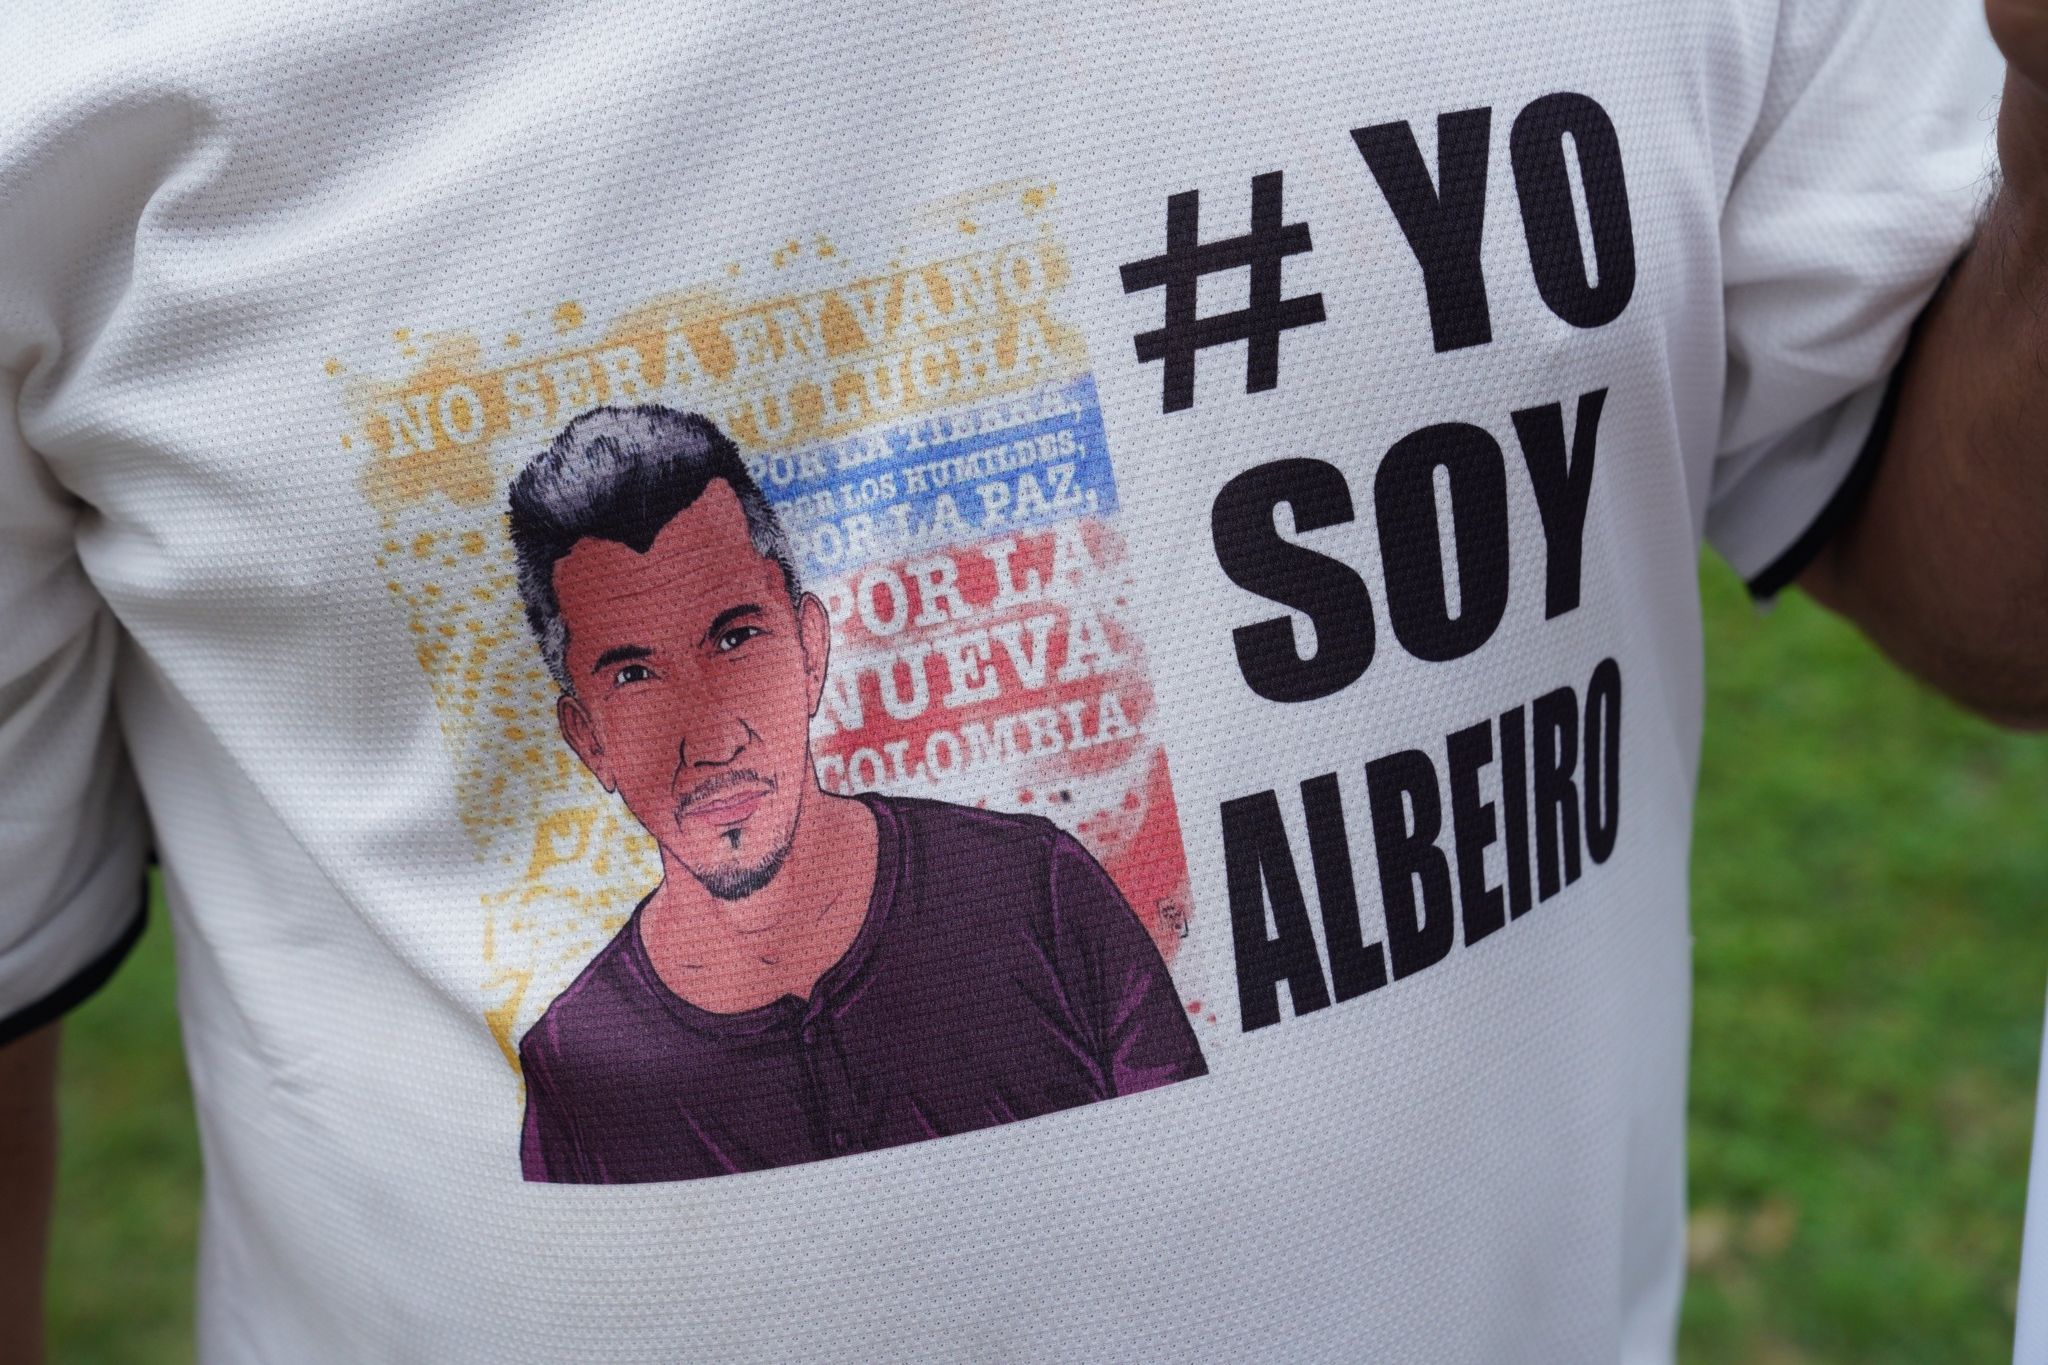 A former FARC fighter wears a t-shirt with the image of Juan de Jesus Monroy, also known as Albeiro, a FARC party leader murdered in October. The assassination unleashed Sunday's march on Bogota.